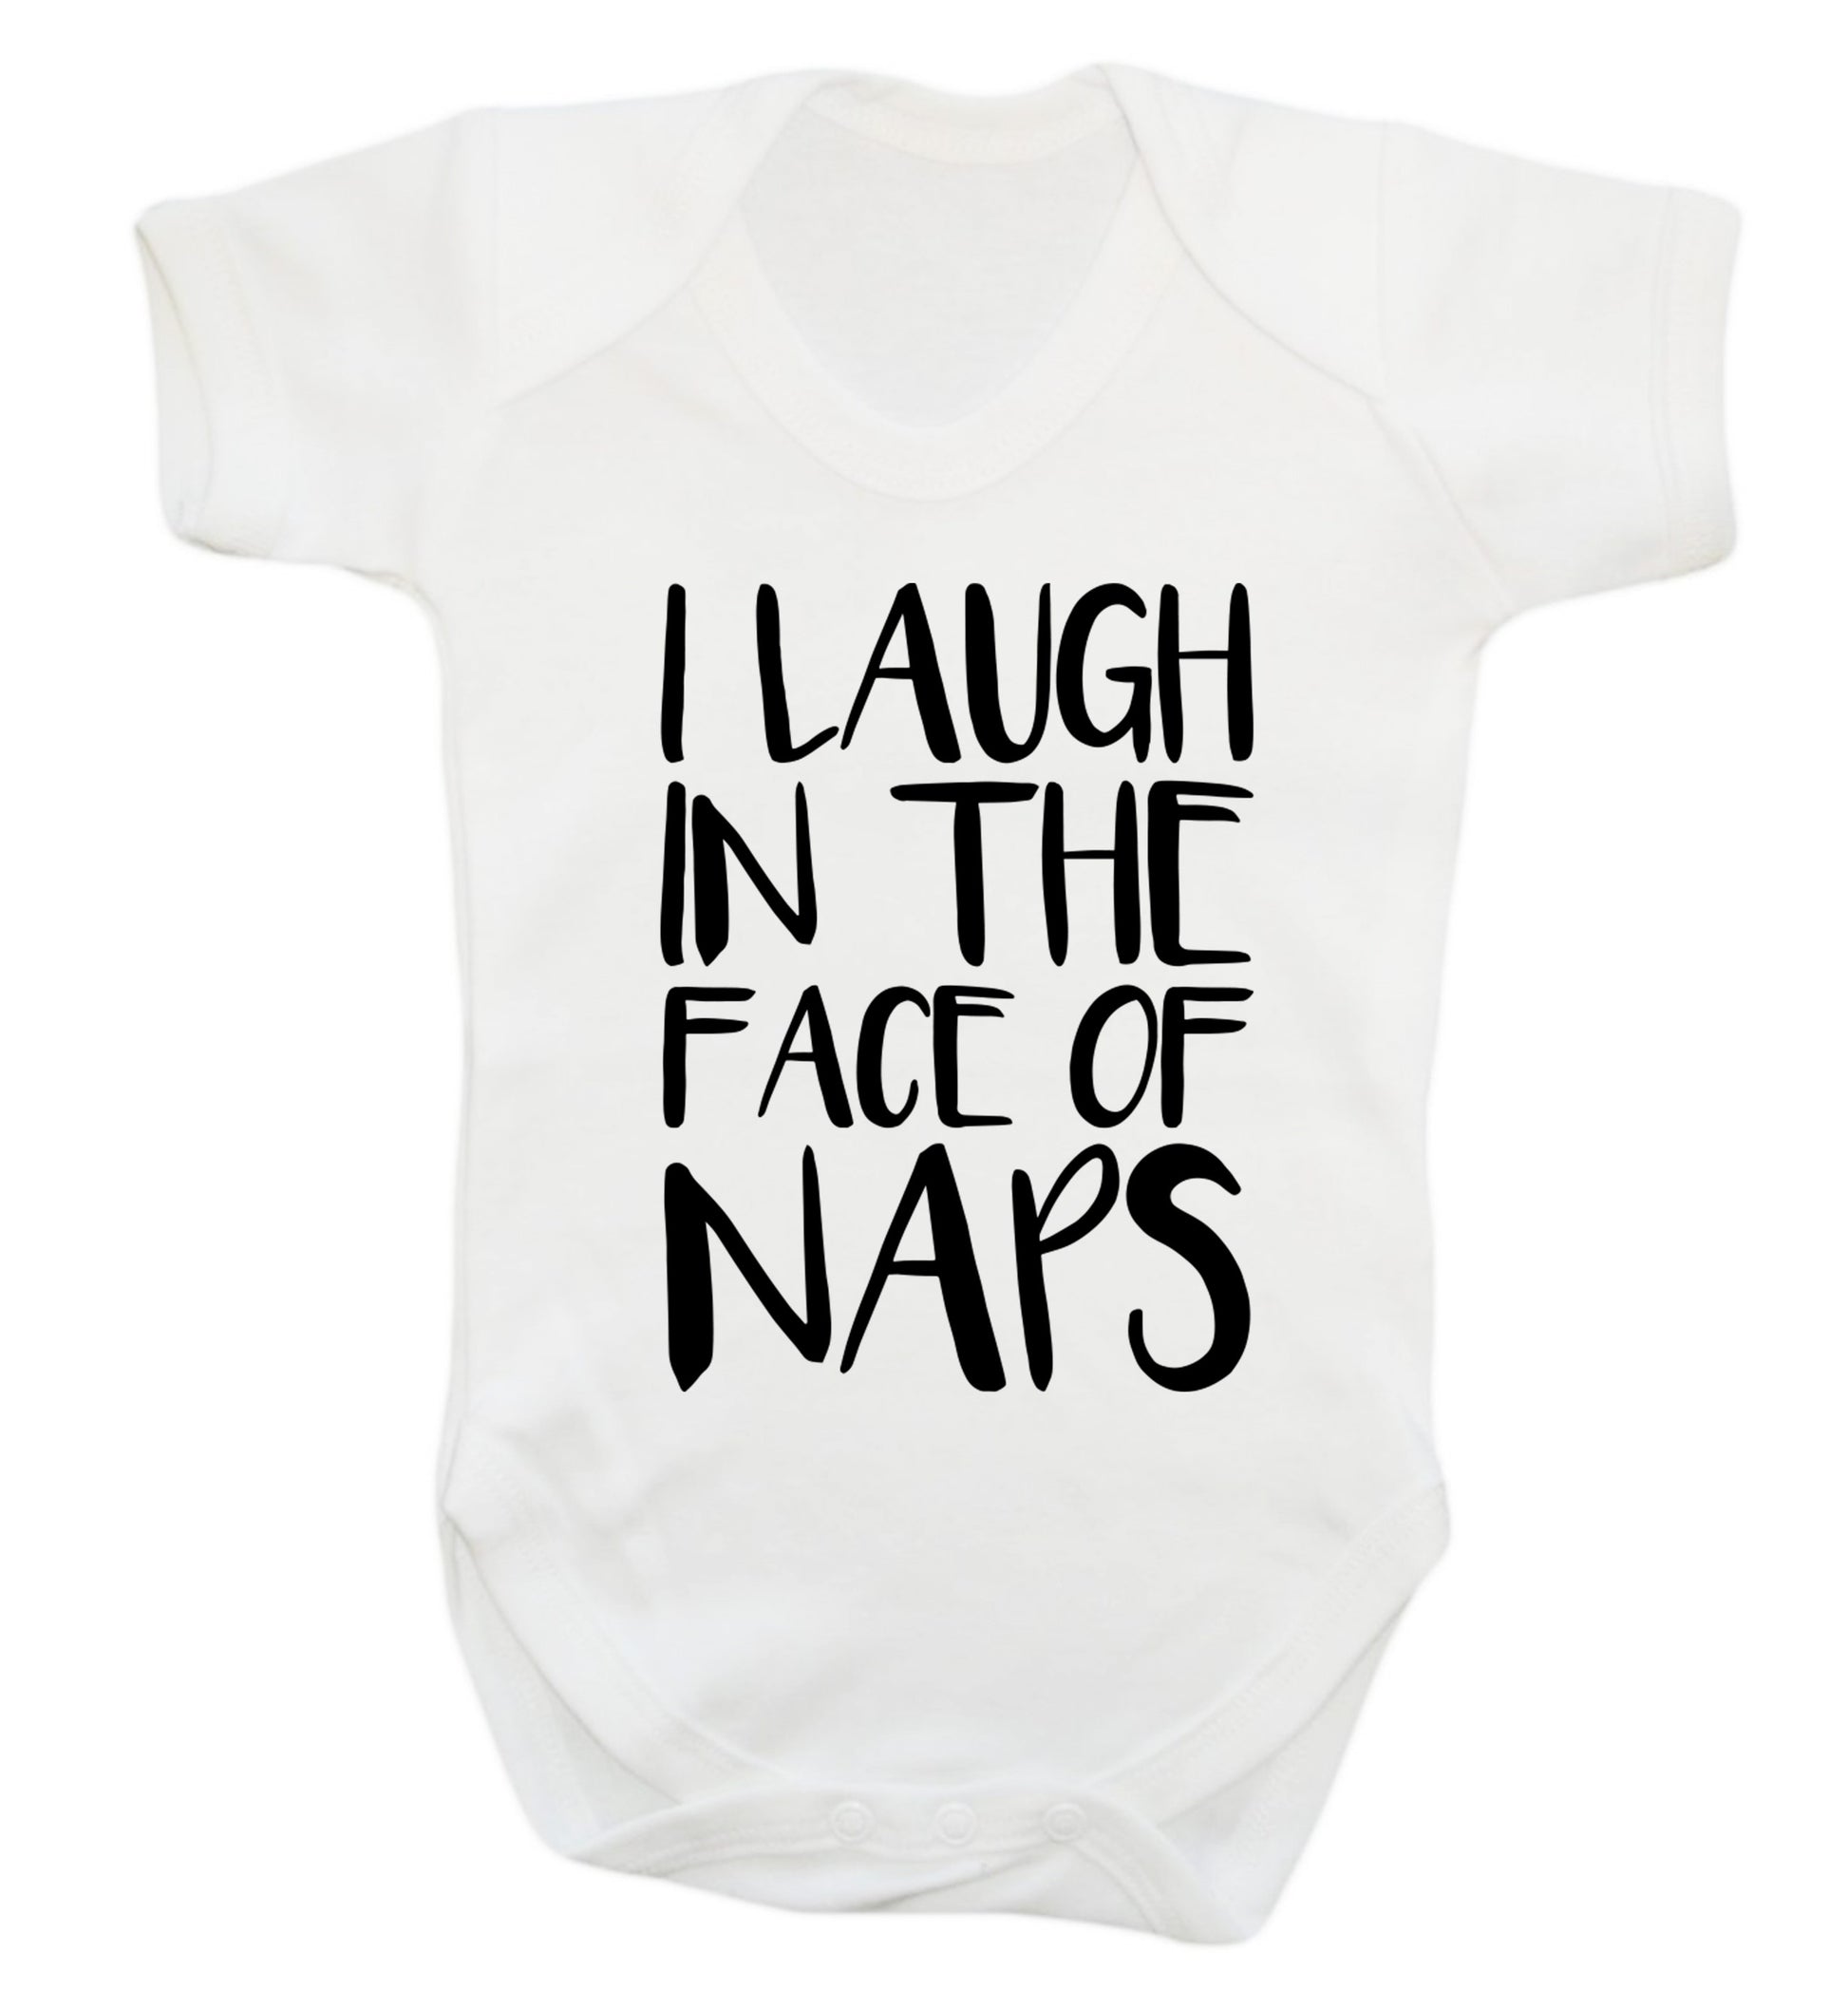 I laugh in the face of naps Baby Vest white 18-24 months